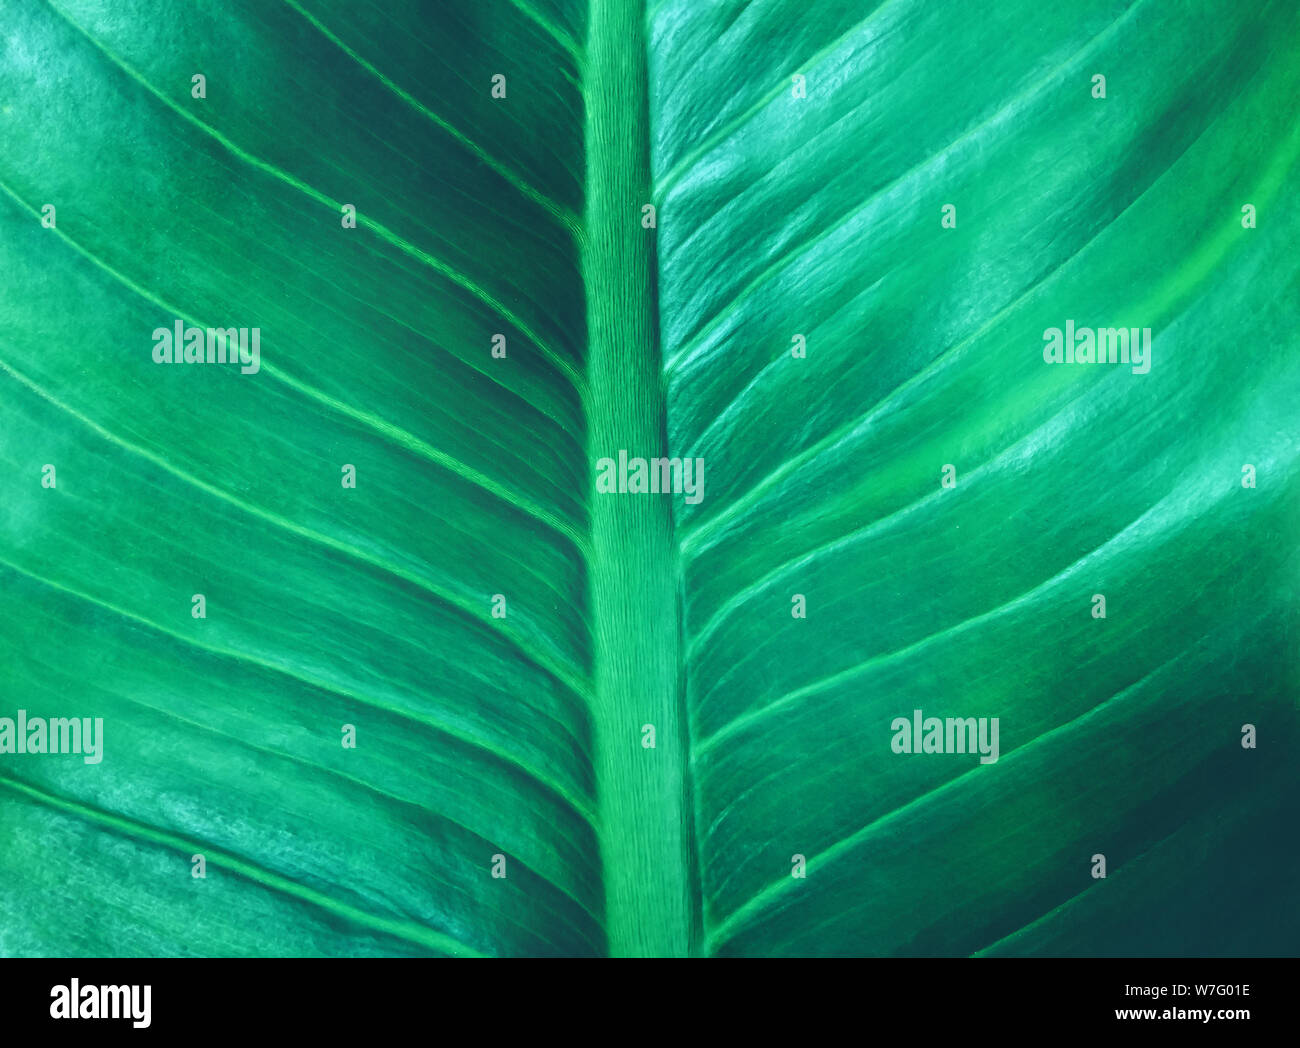 tropical leaf dark green foliage texture the nature background Stock Photo